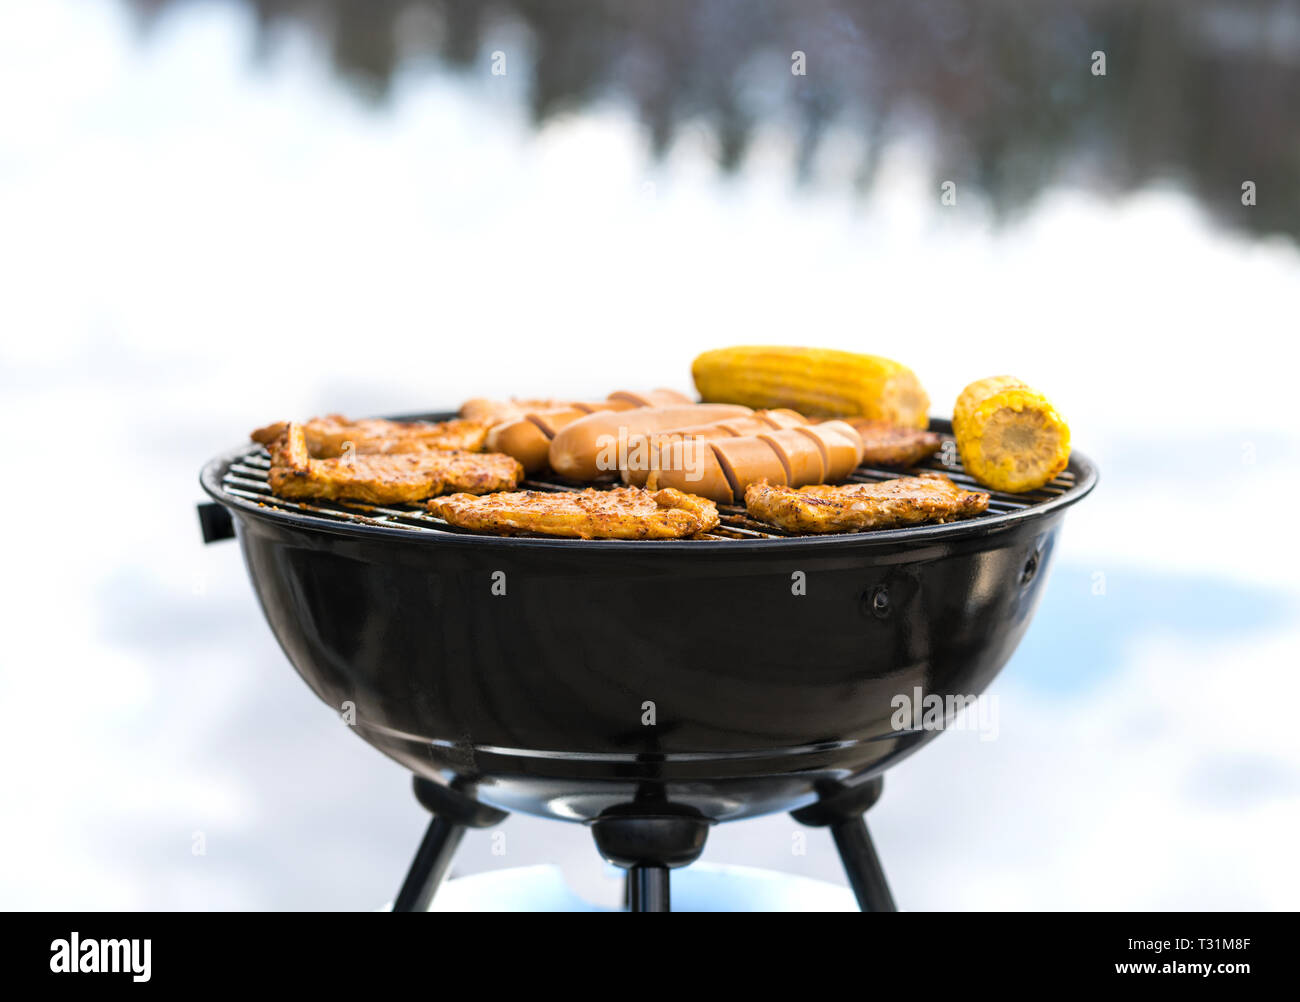 Grilling at the beach. Food cooking on a charcoal kettle grill. Sausages, meat, corn and vegetables in outdoor barbeque in summer. BBQ party. Stock Photo